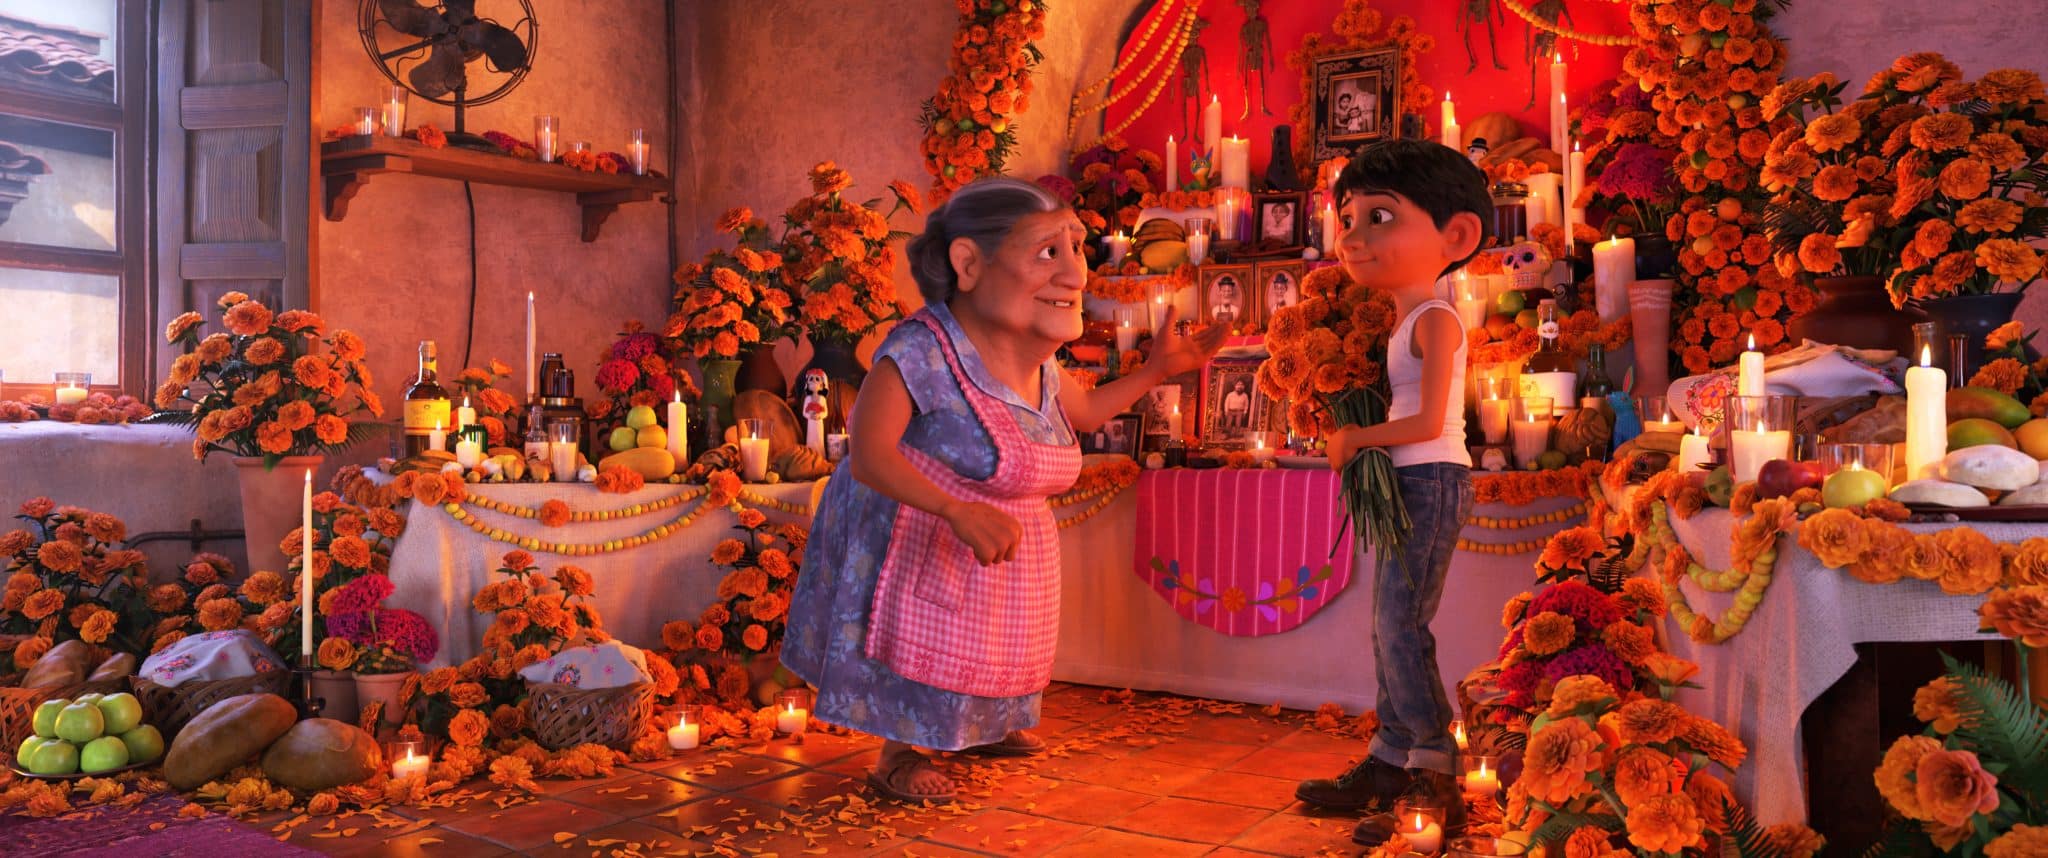 Pixar Coco Premiere Experience + Movie Review! #PixarCocoEvent